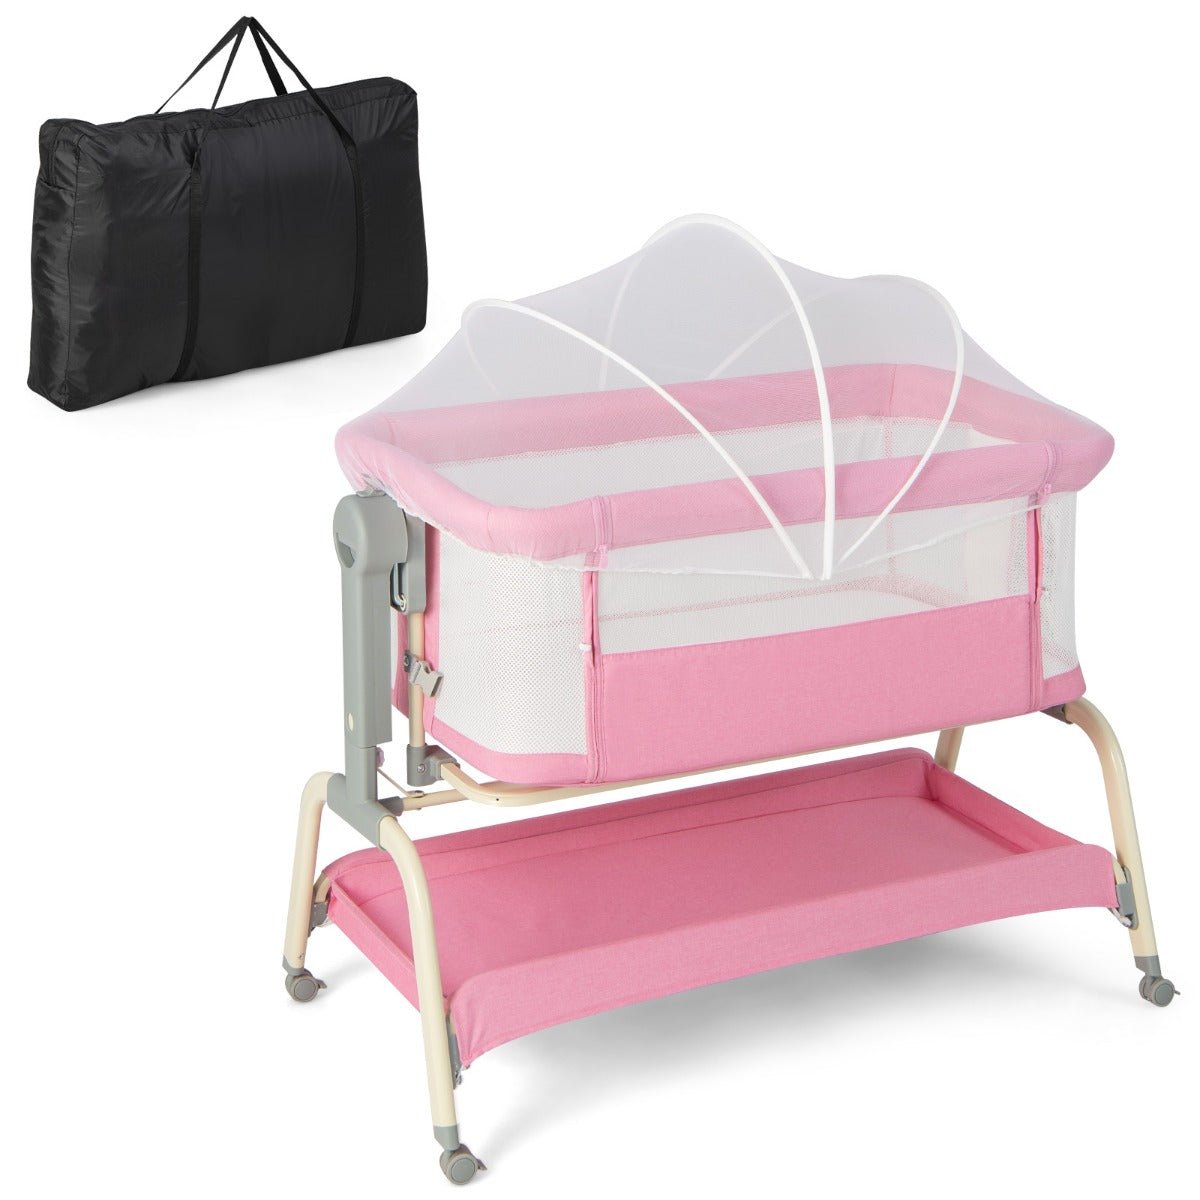 Shop Pink 3-in-1 Travel Cot - Bedside, Stand-Alone, or Rocking Cradle